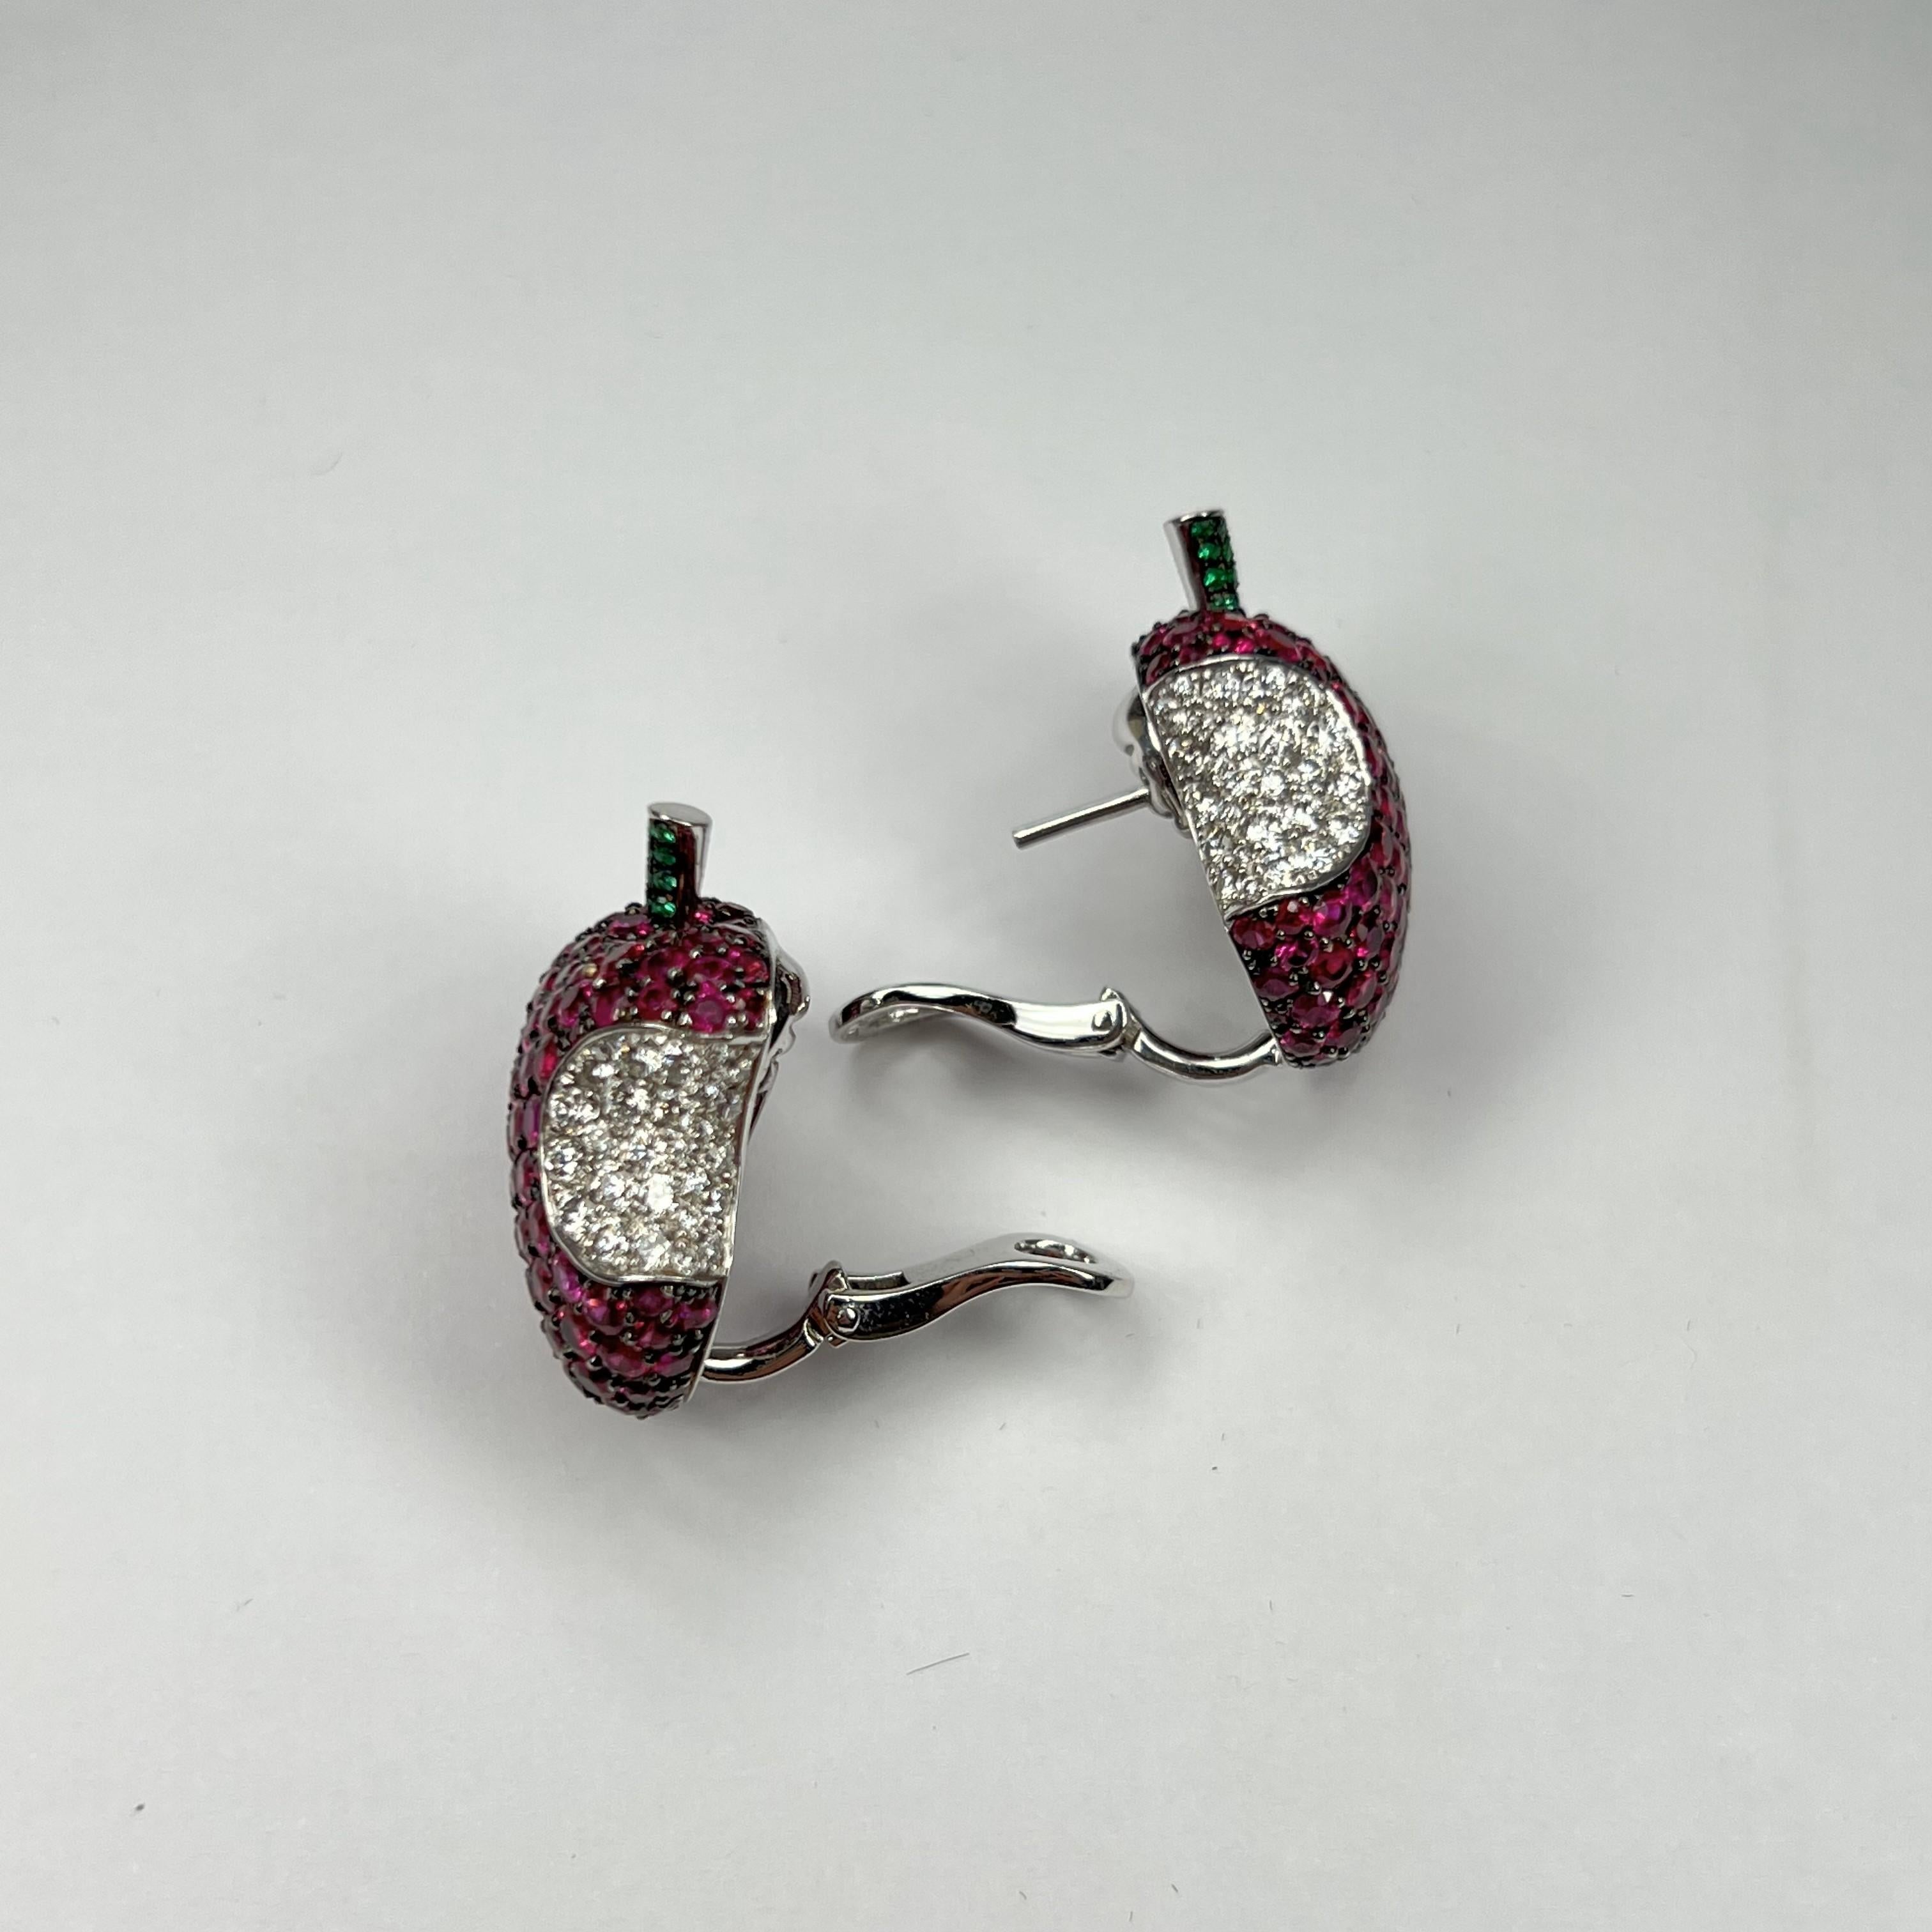 Women's De Grisogono Apple Earrings with White Gold, Rubies and Diamonds, 15410/02 For Sale